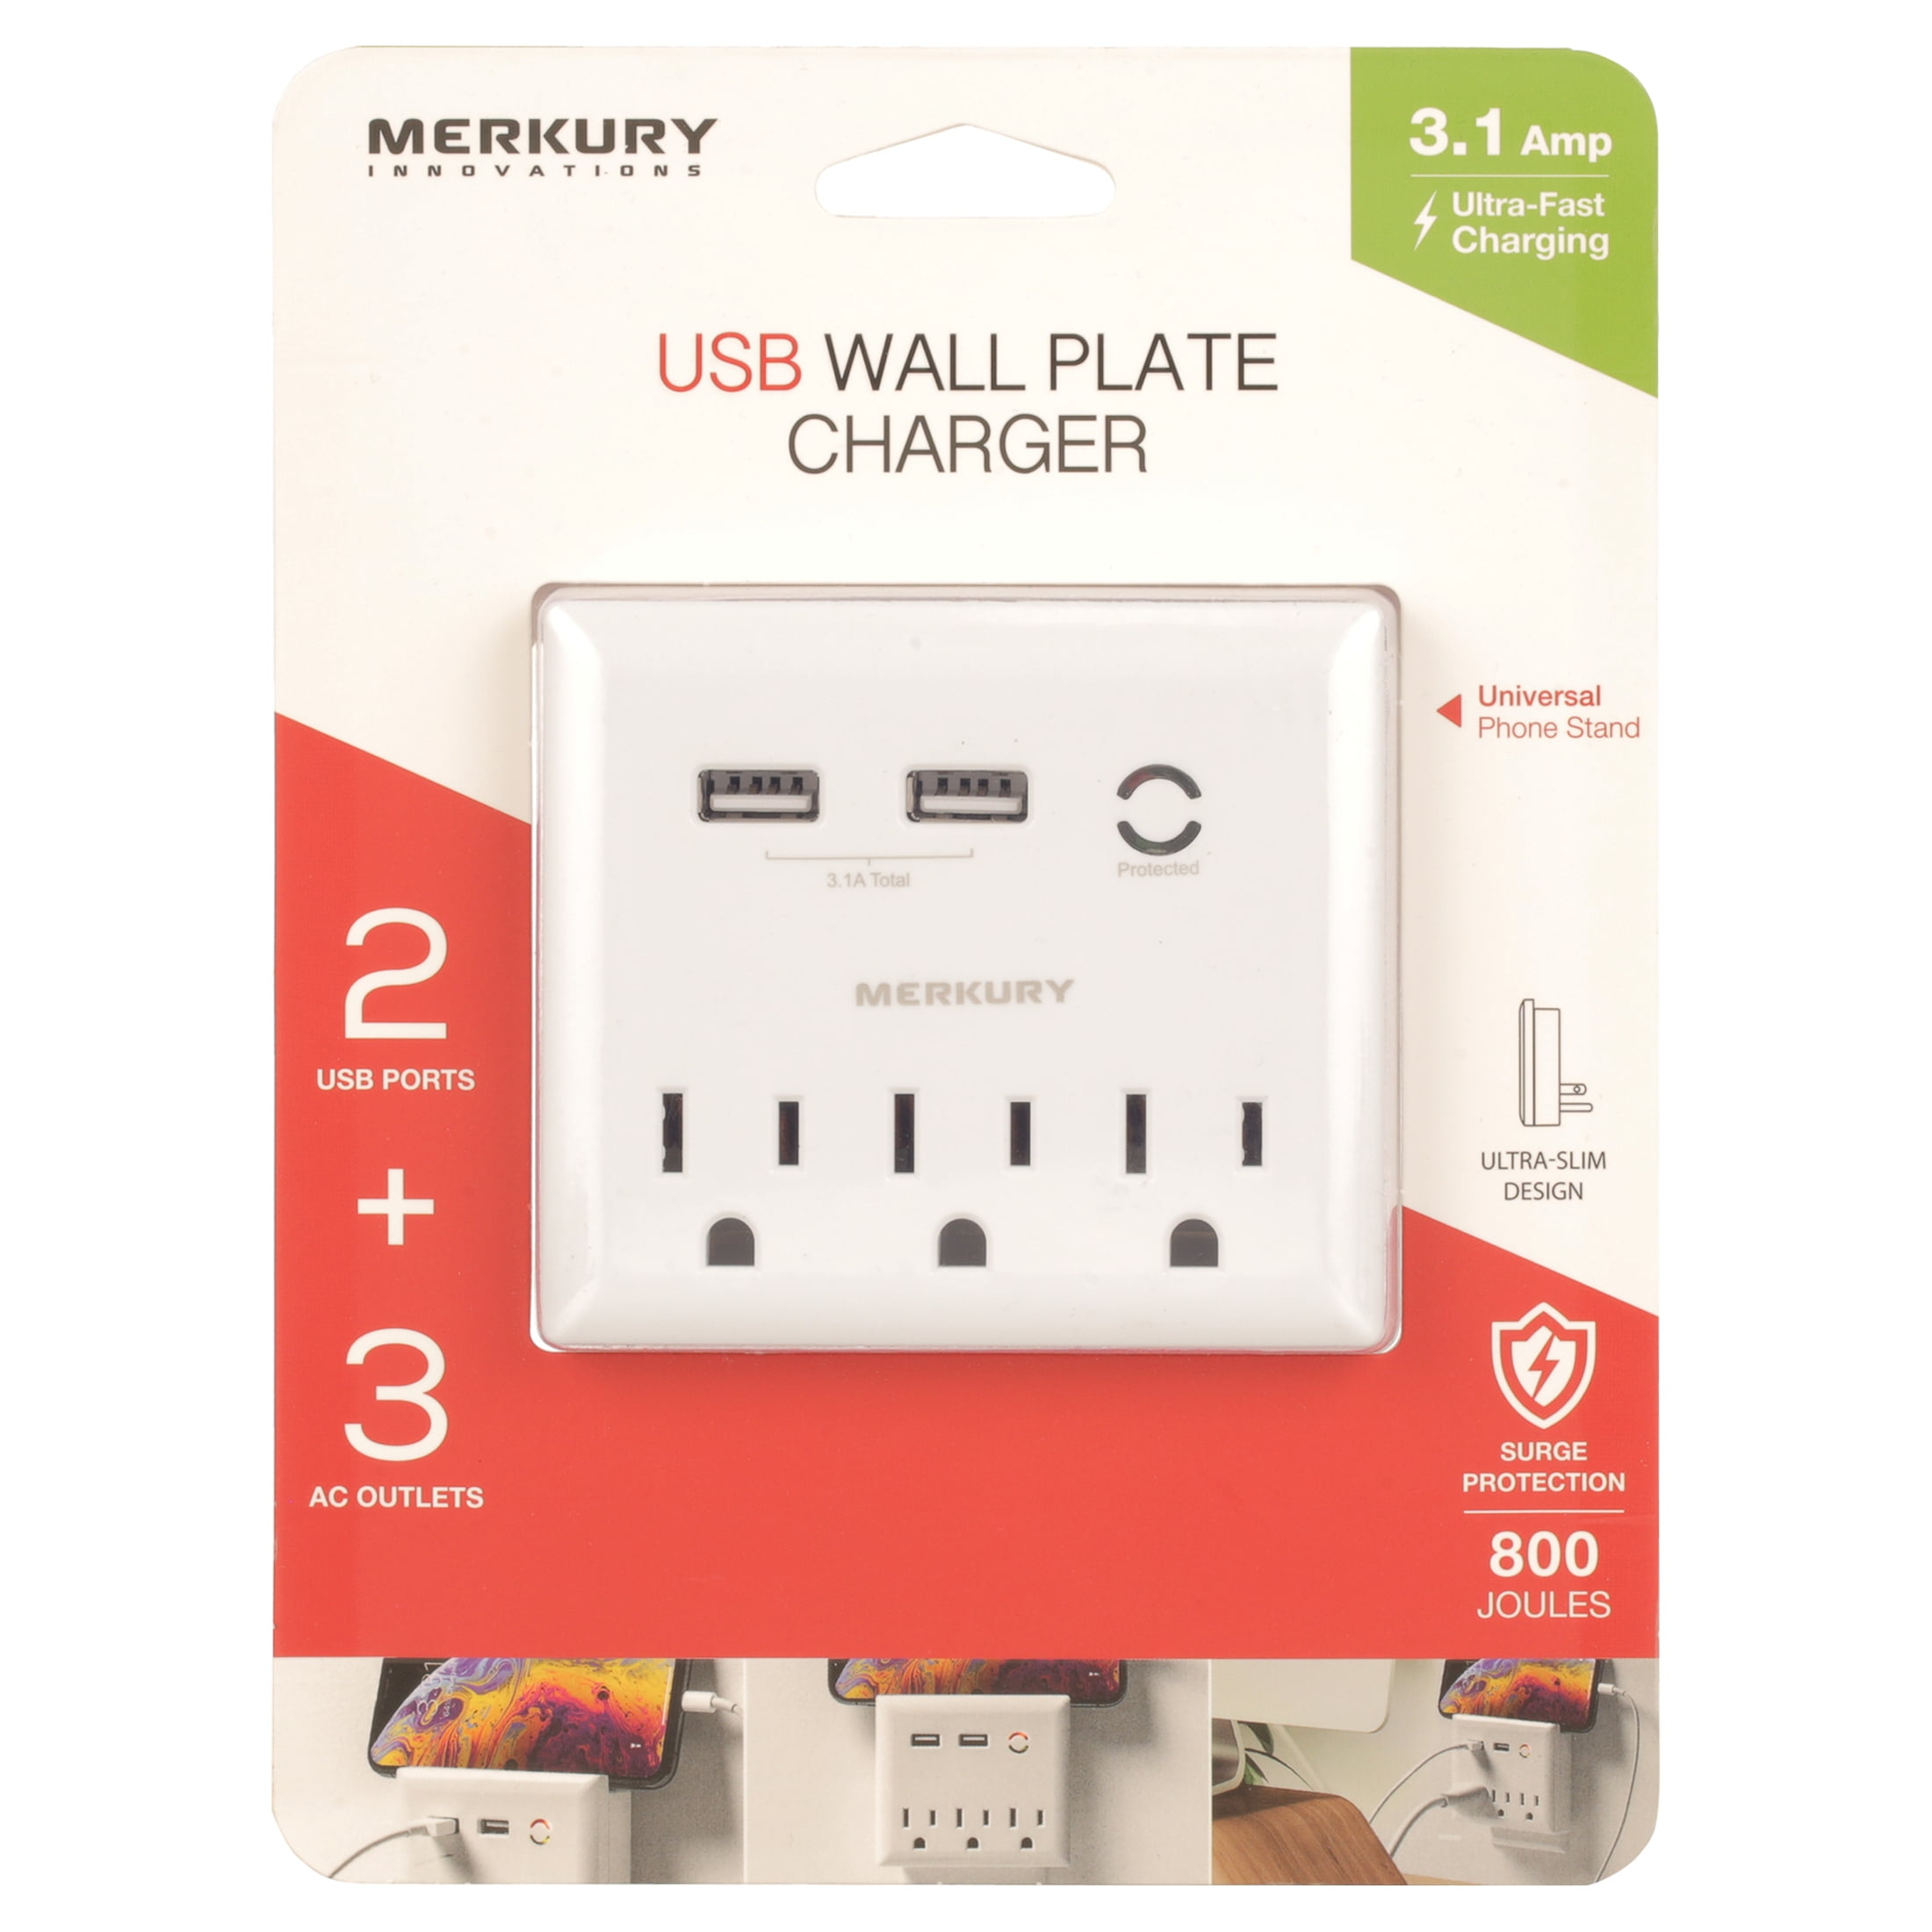 Merkury Innovations  Amp USB Wall Charger 3-Outlet Extender with 2 USB  Charging Ports and Phone Stand, White 